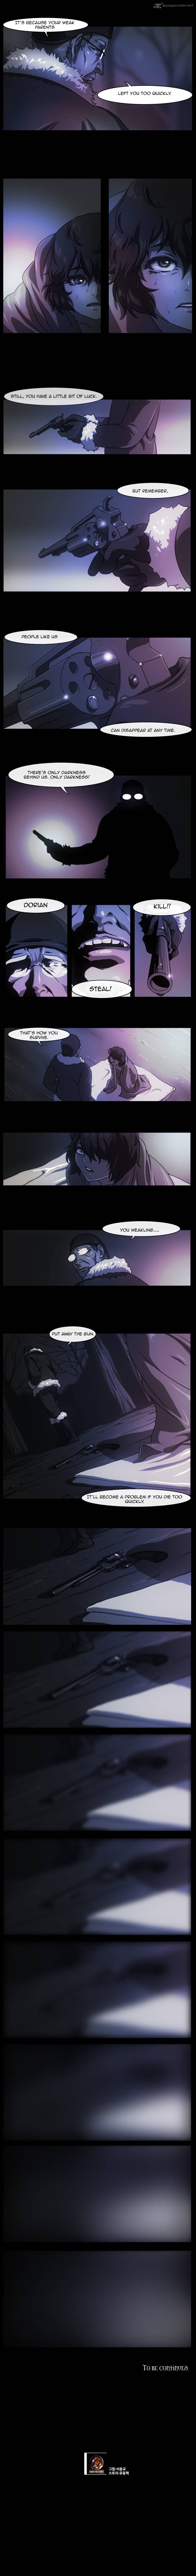 Over Steam Chapter 5 Page 6